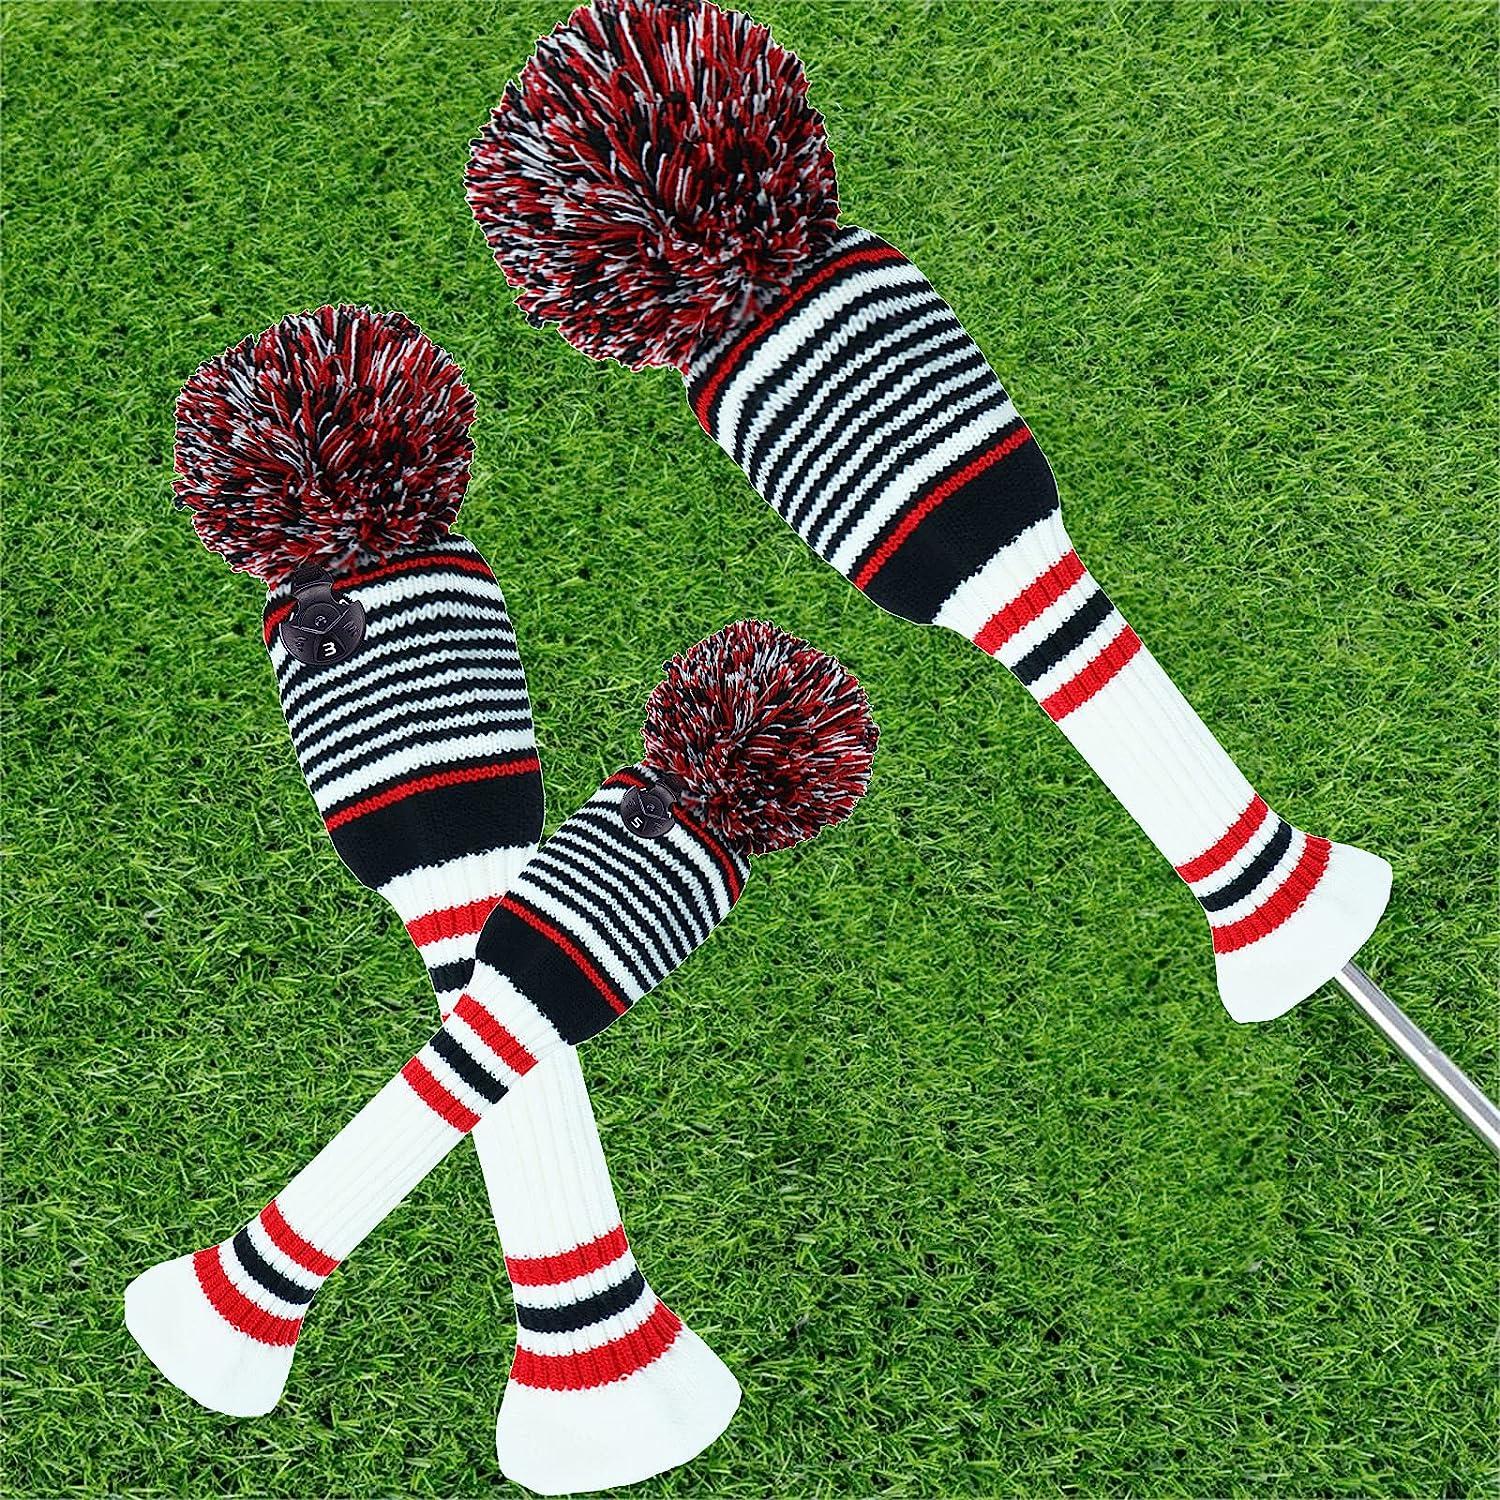 Golf Club Head Covers Knit for Woods Driver Fairway Hybrid Head Cover  Knitted Pom Pom Stripes Pattern for Main Wood Clubs